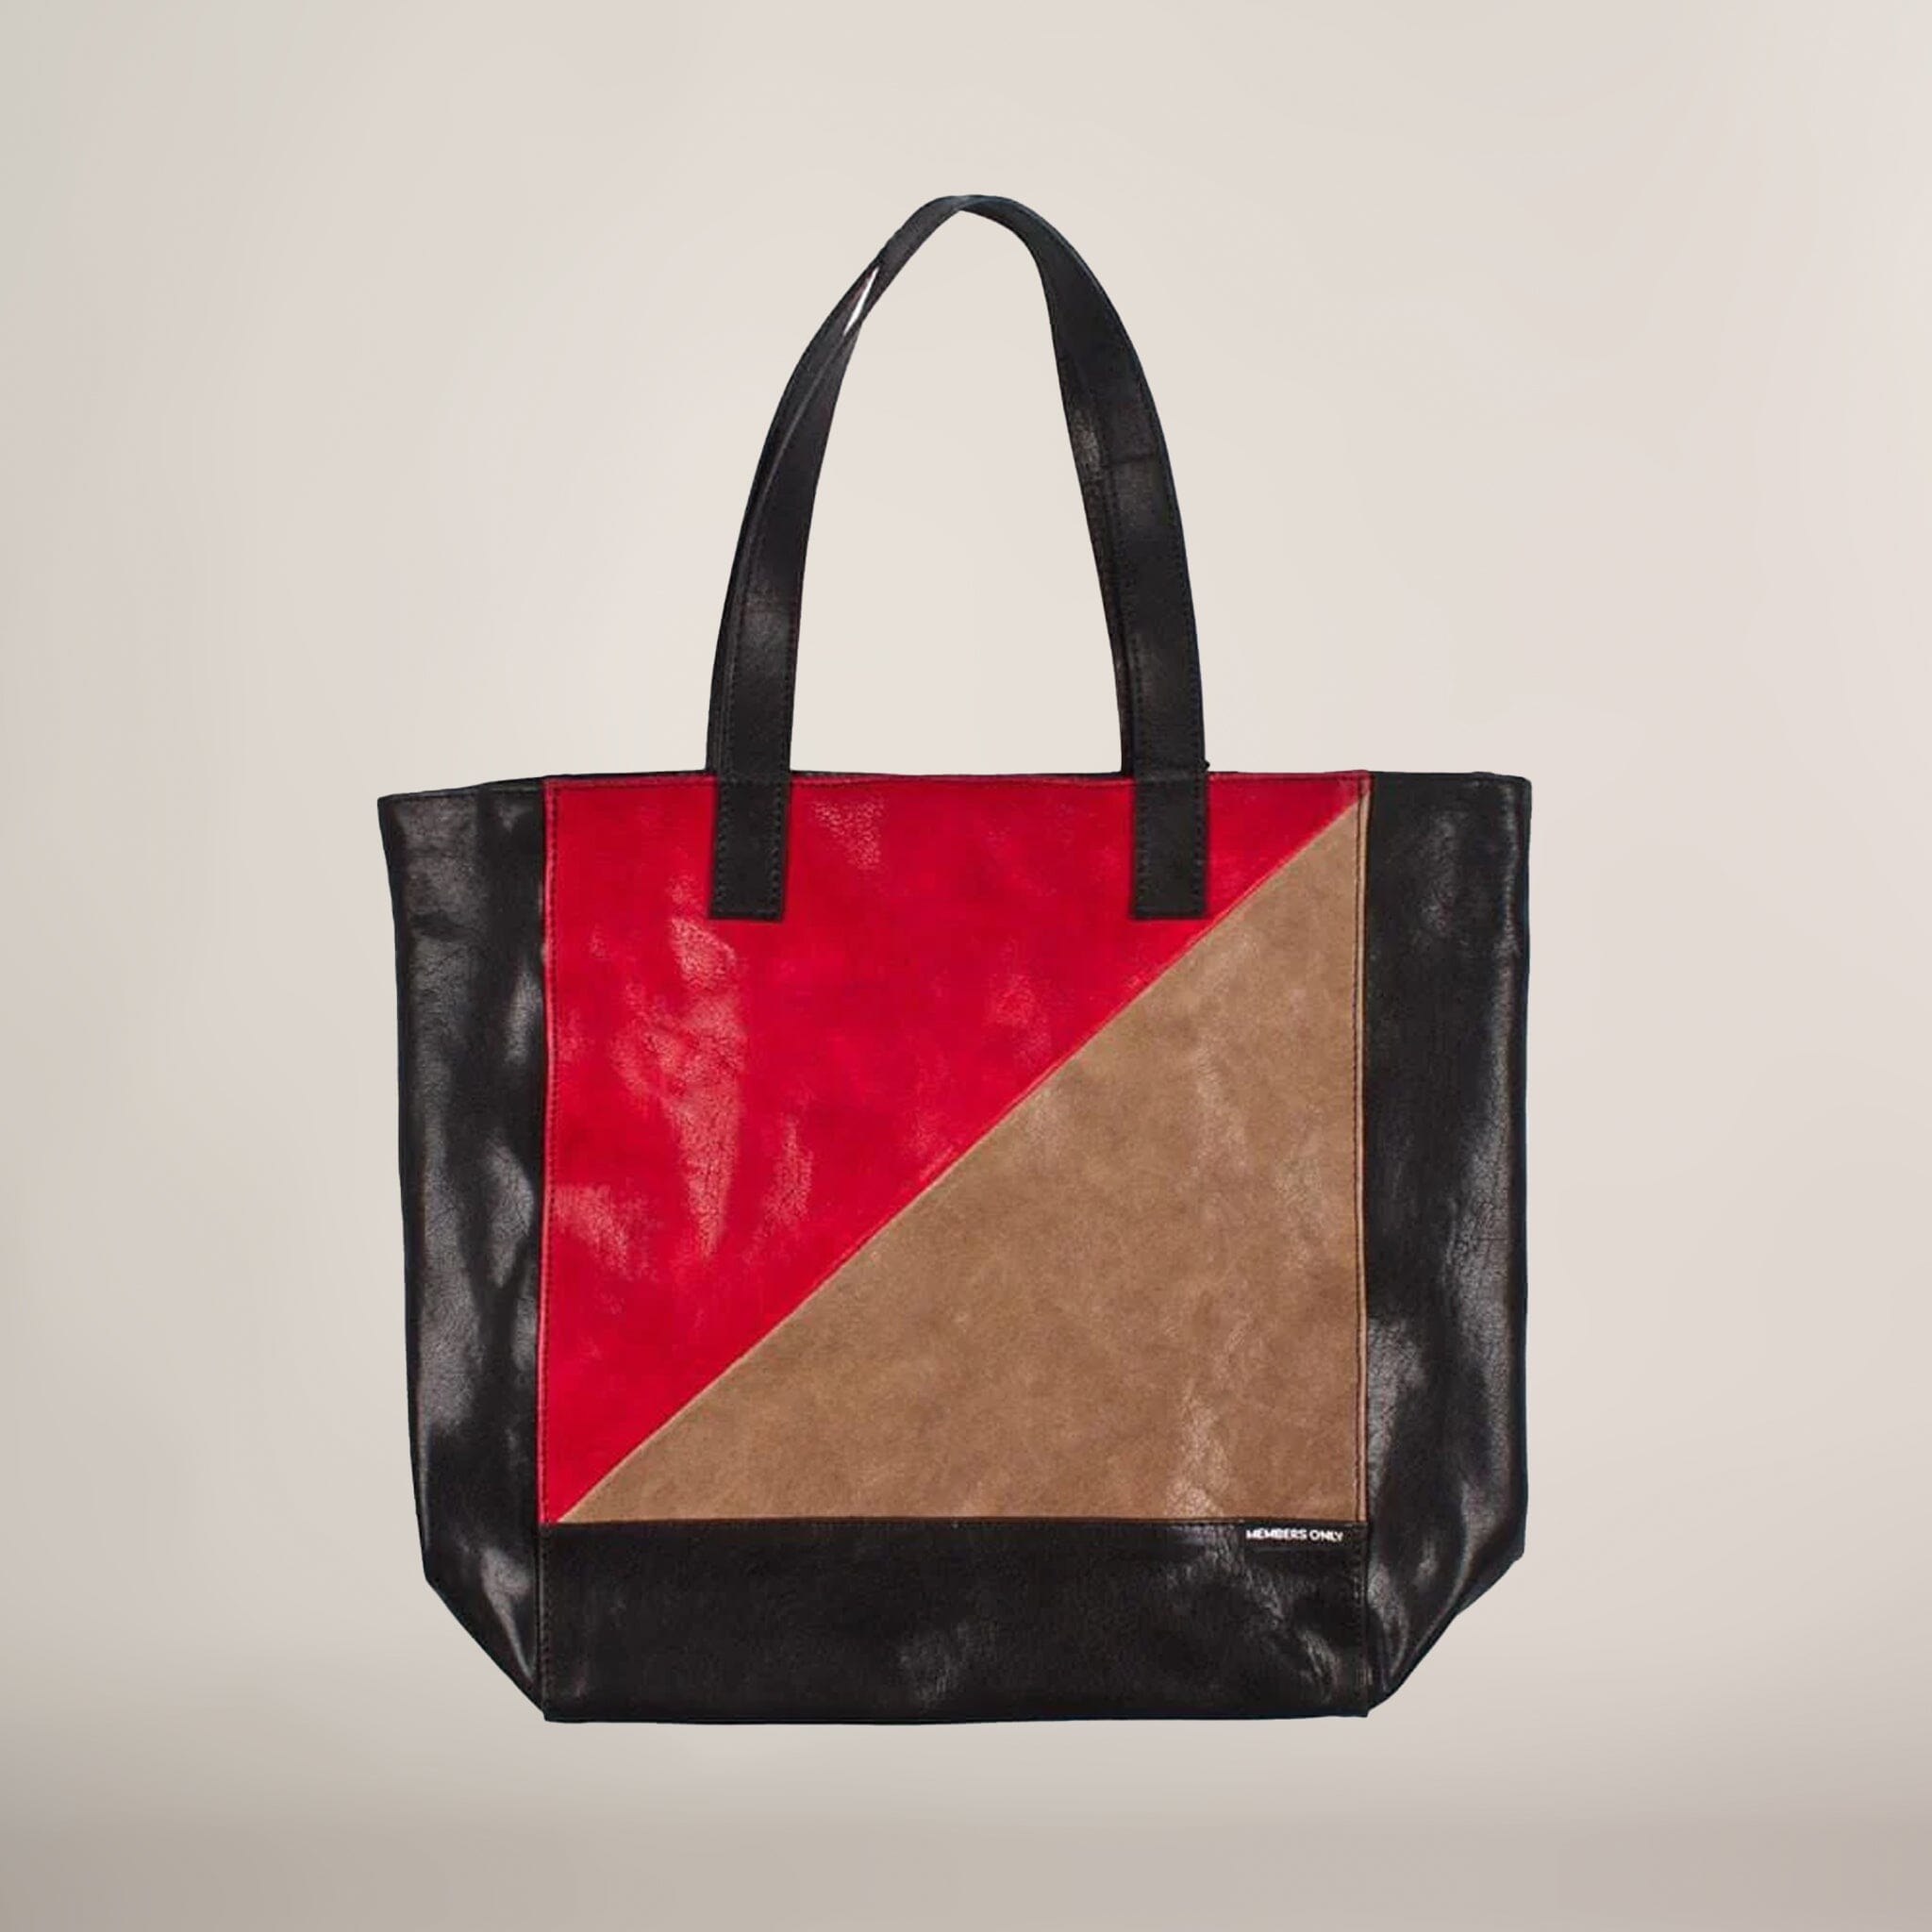 Tote Bag (Genuine Leather) Bag Members Only Red 